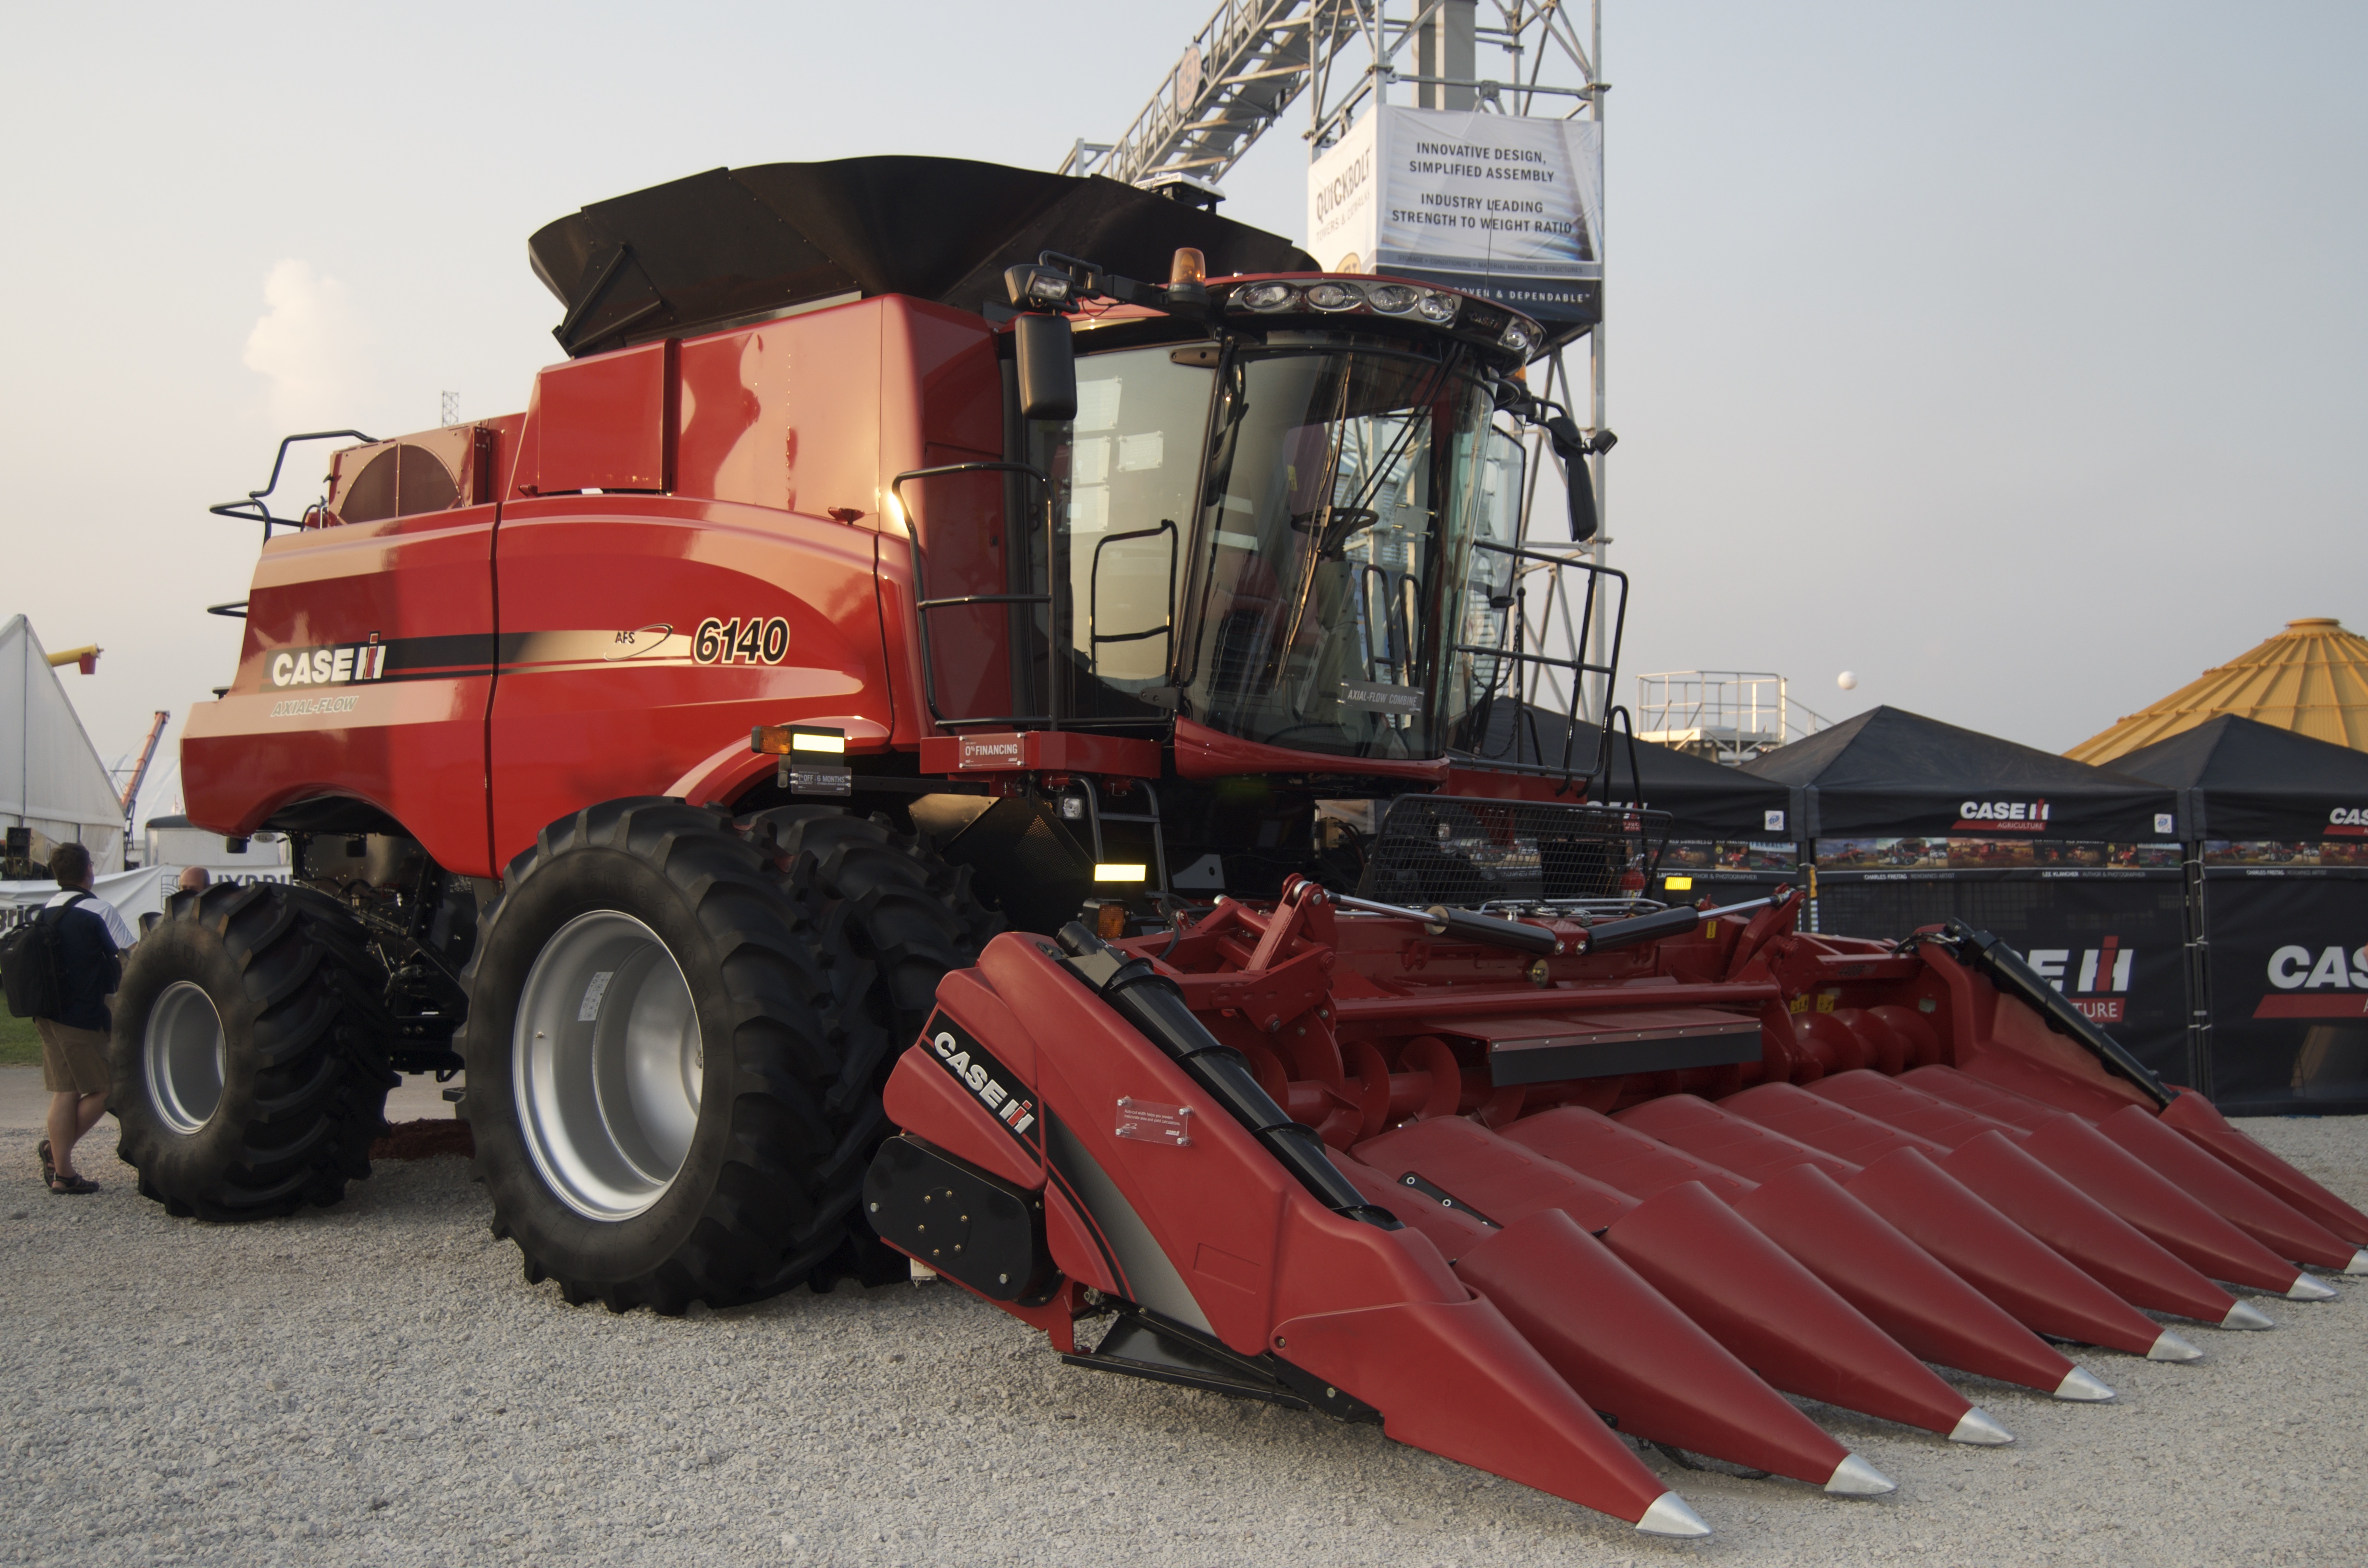 Case IH Introduces Redesigned AxialFlow 140 Series Combines